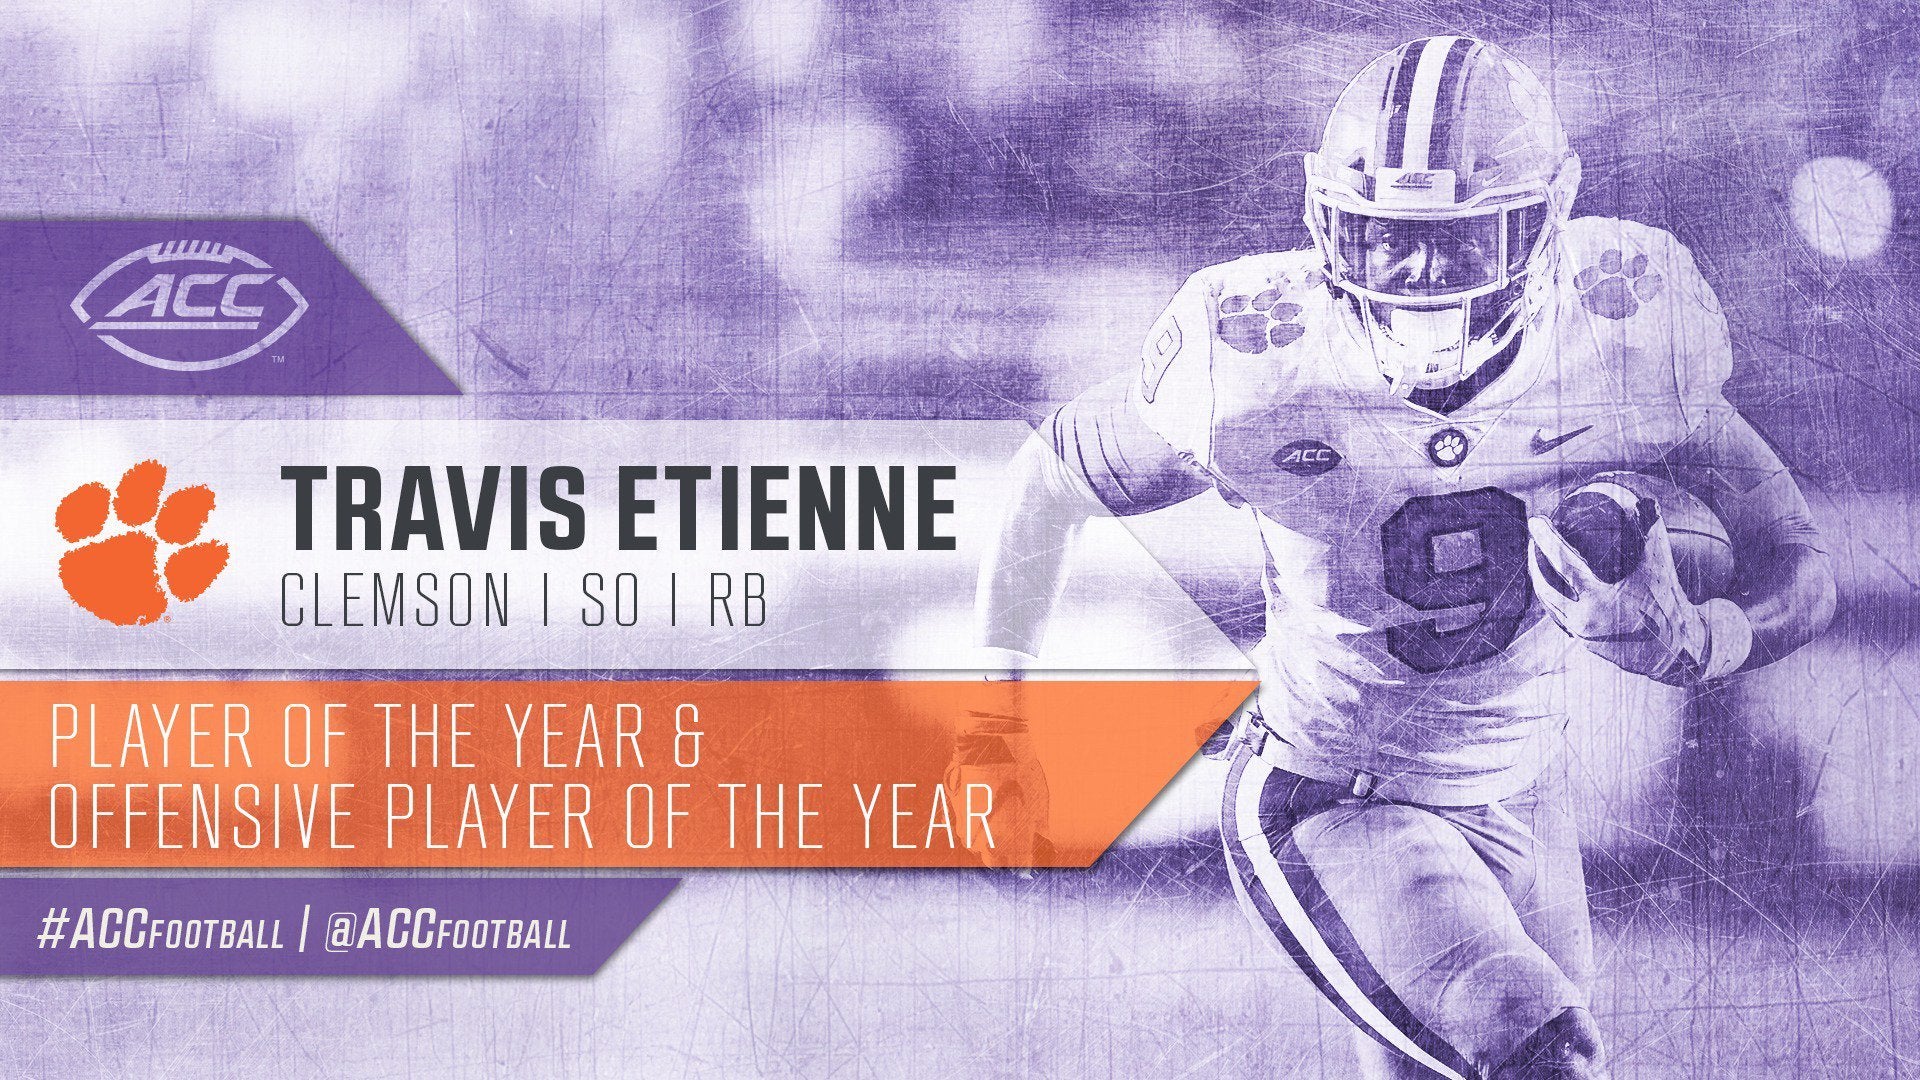 Travis etienne named acc player of the year rcfb